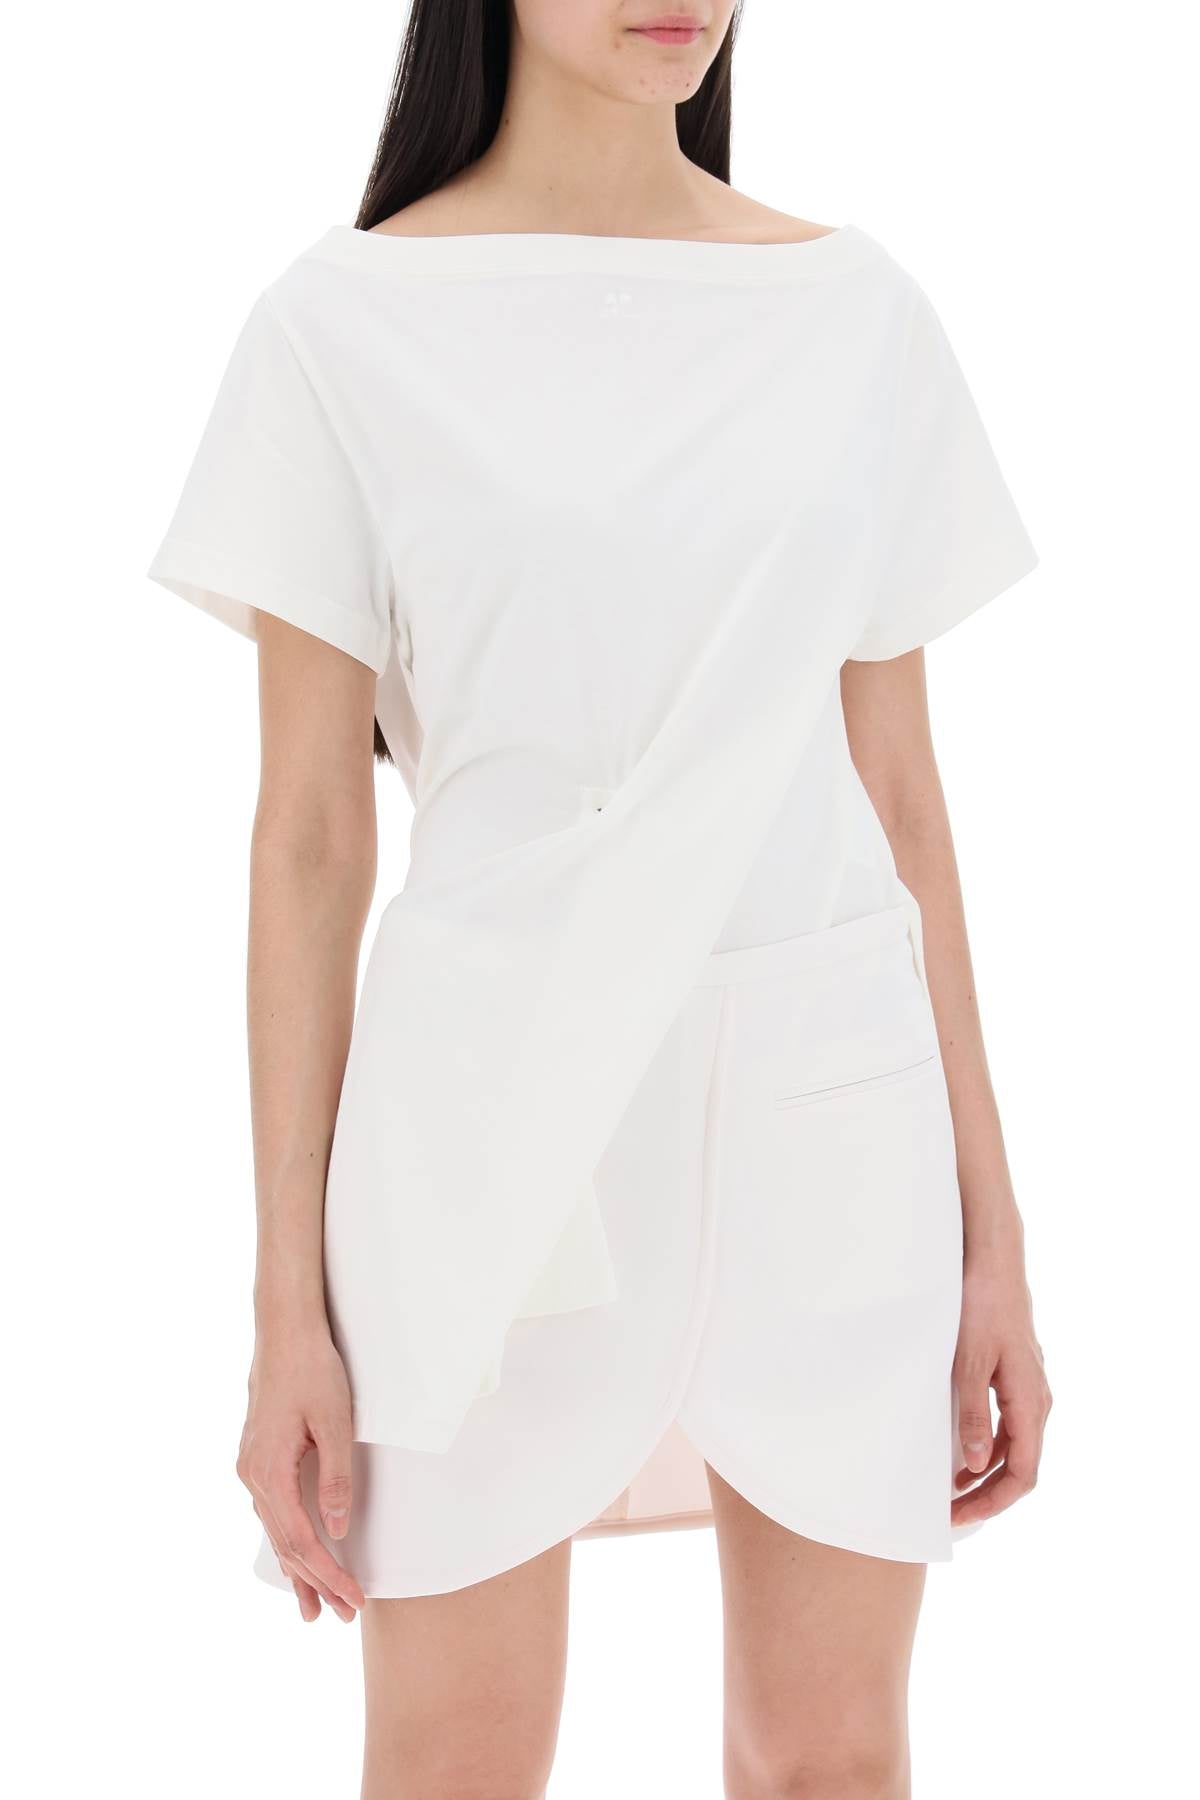 Courreges Twisted Body T Shirt   White